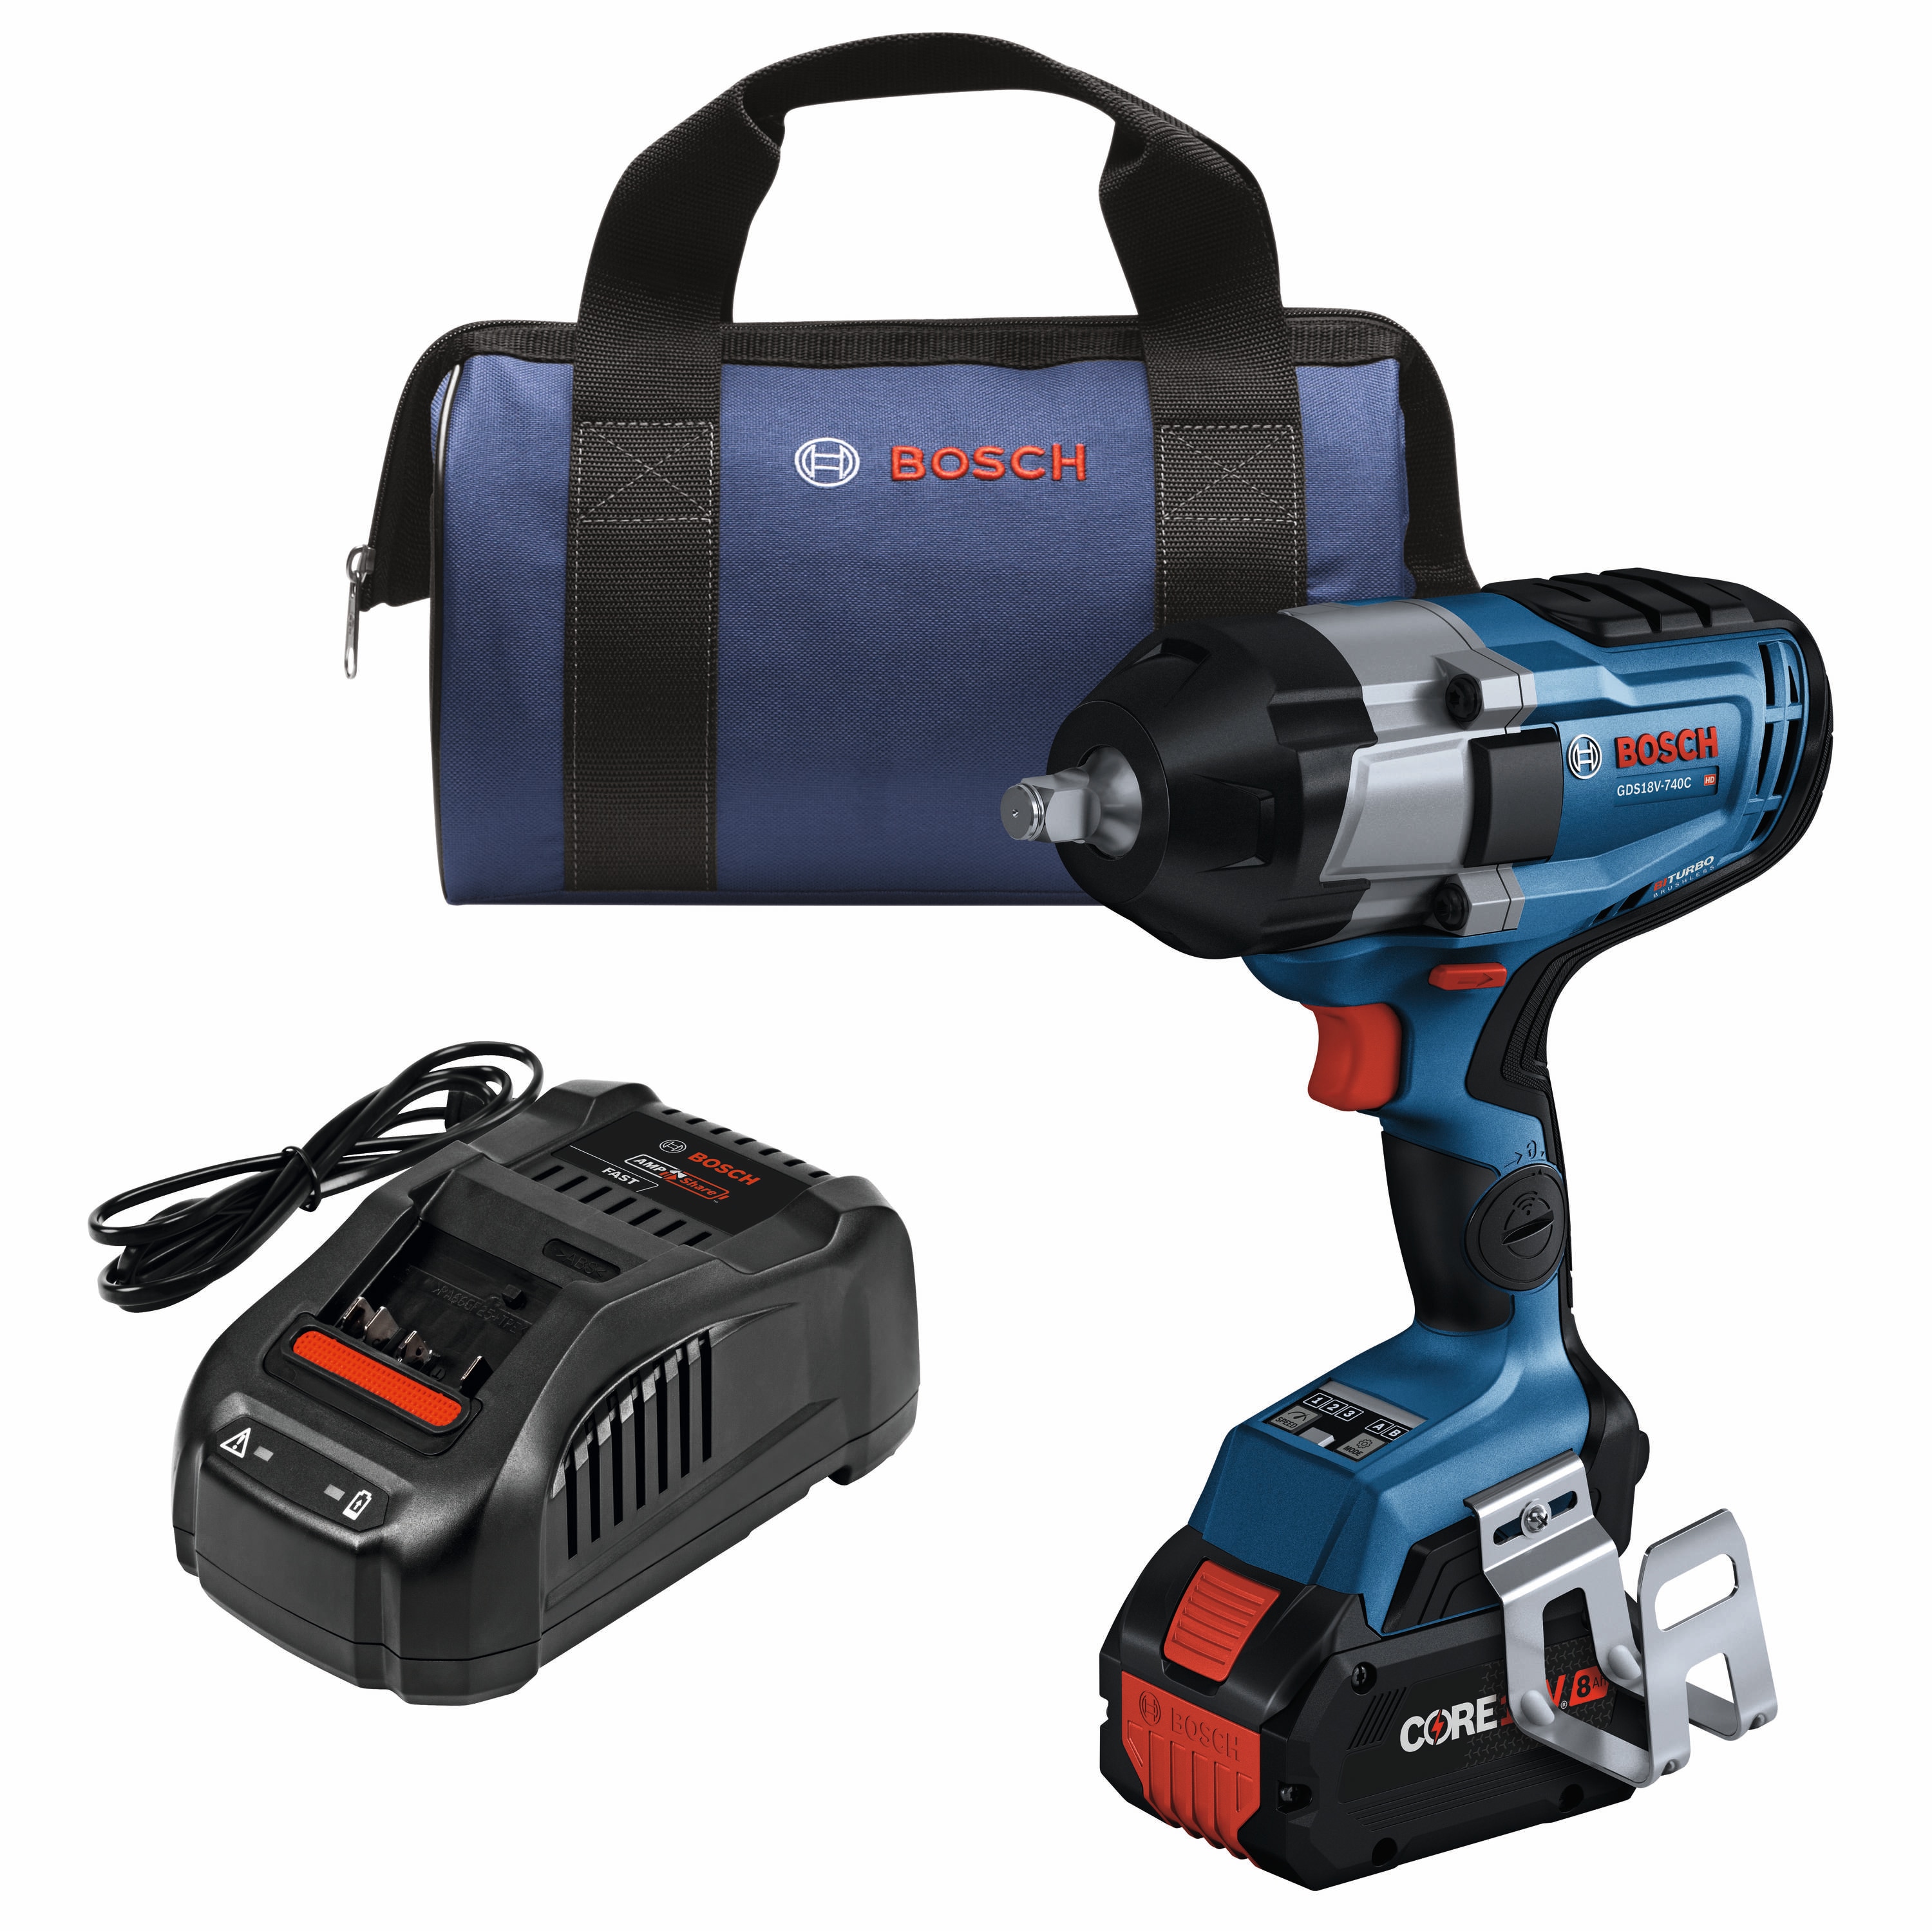 Cordless tools in a new performance dimension: First Biturbo drill drivers  from Bosch for pros - Bosch Media Service